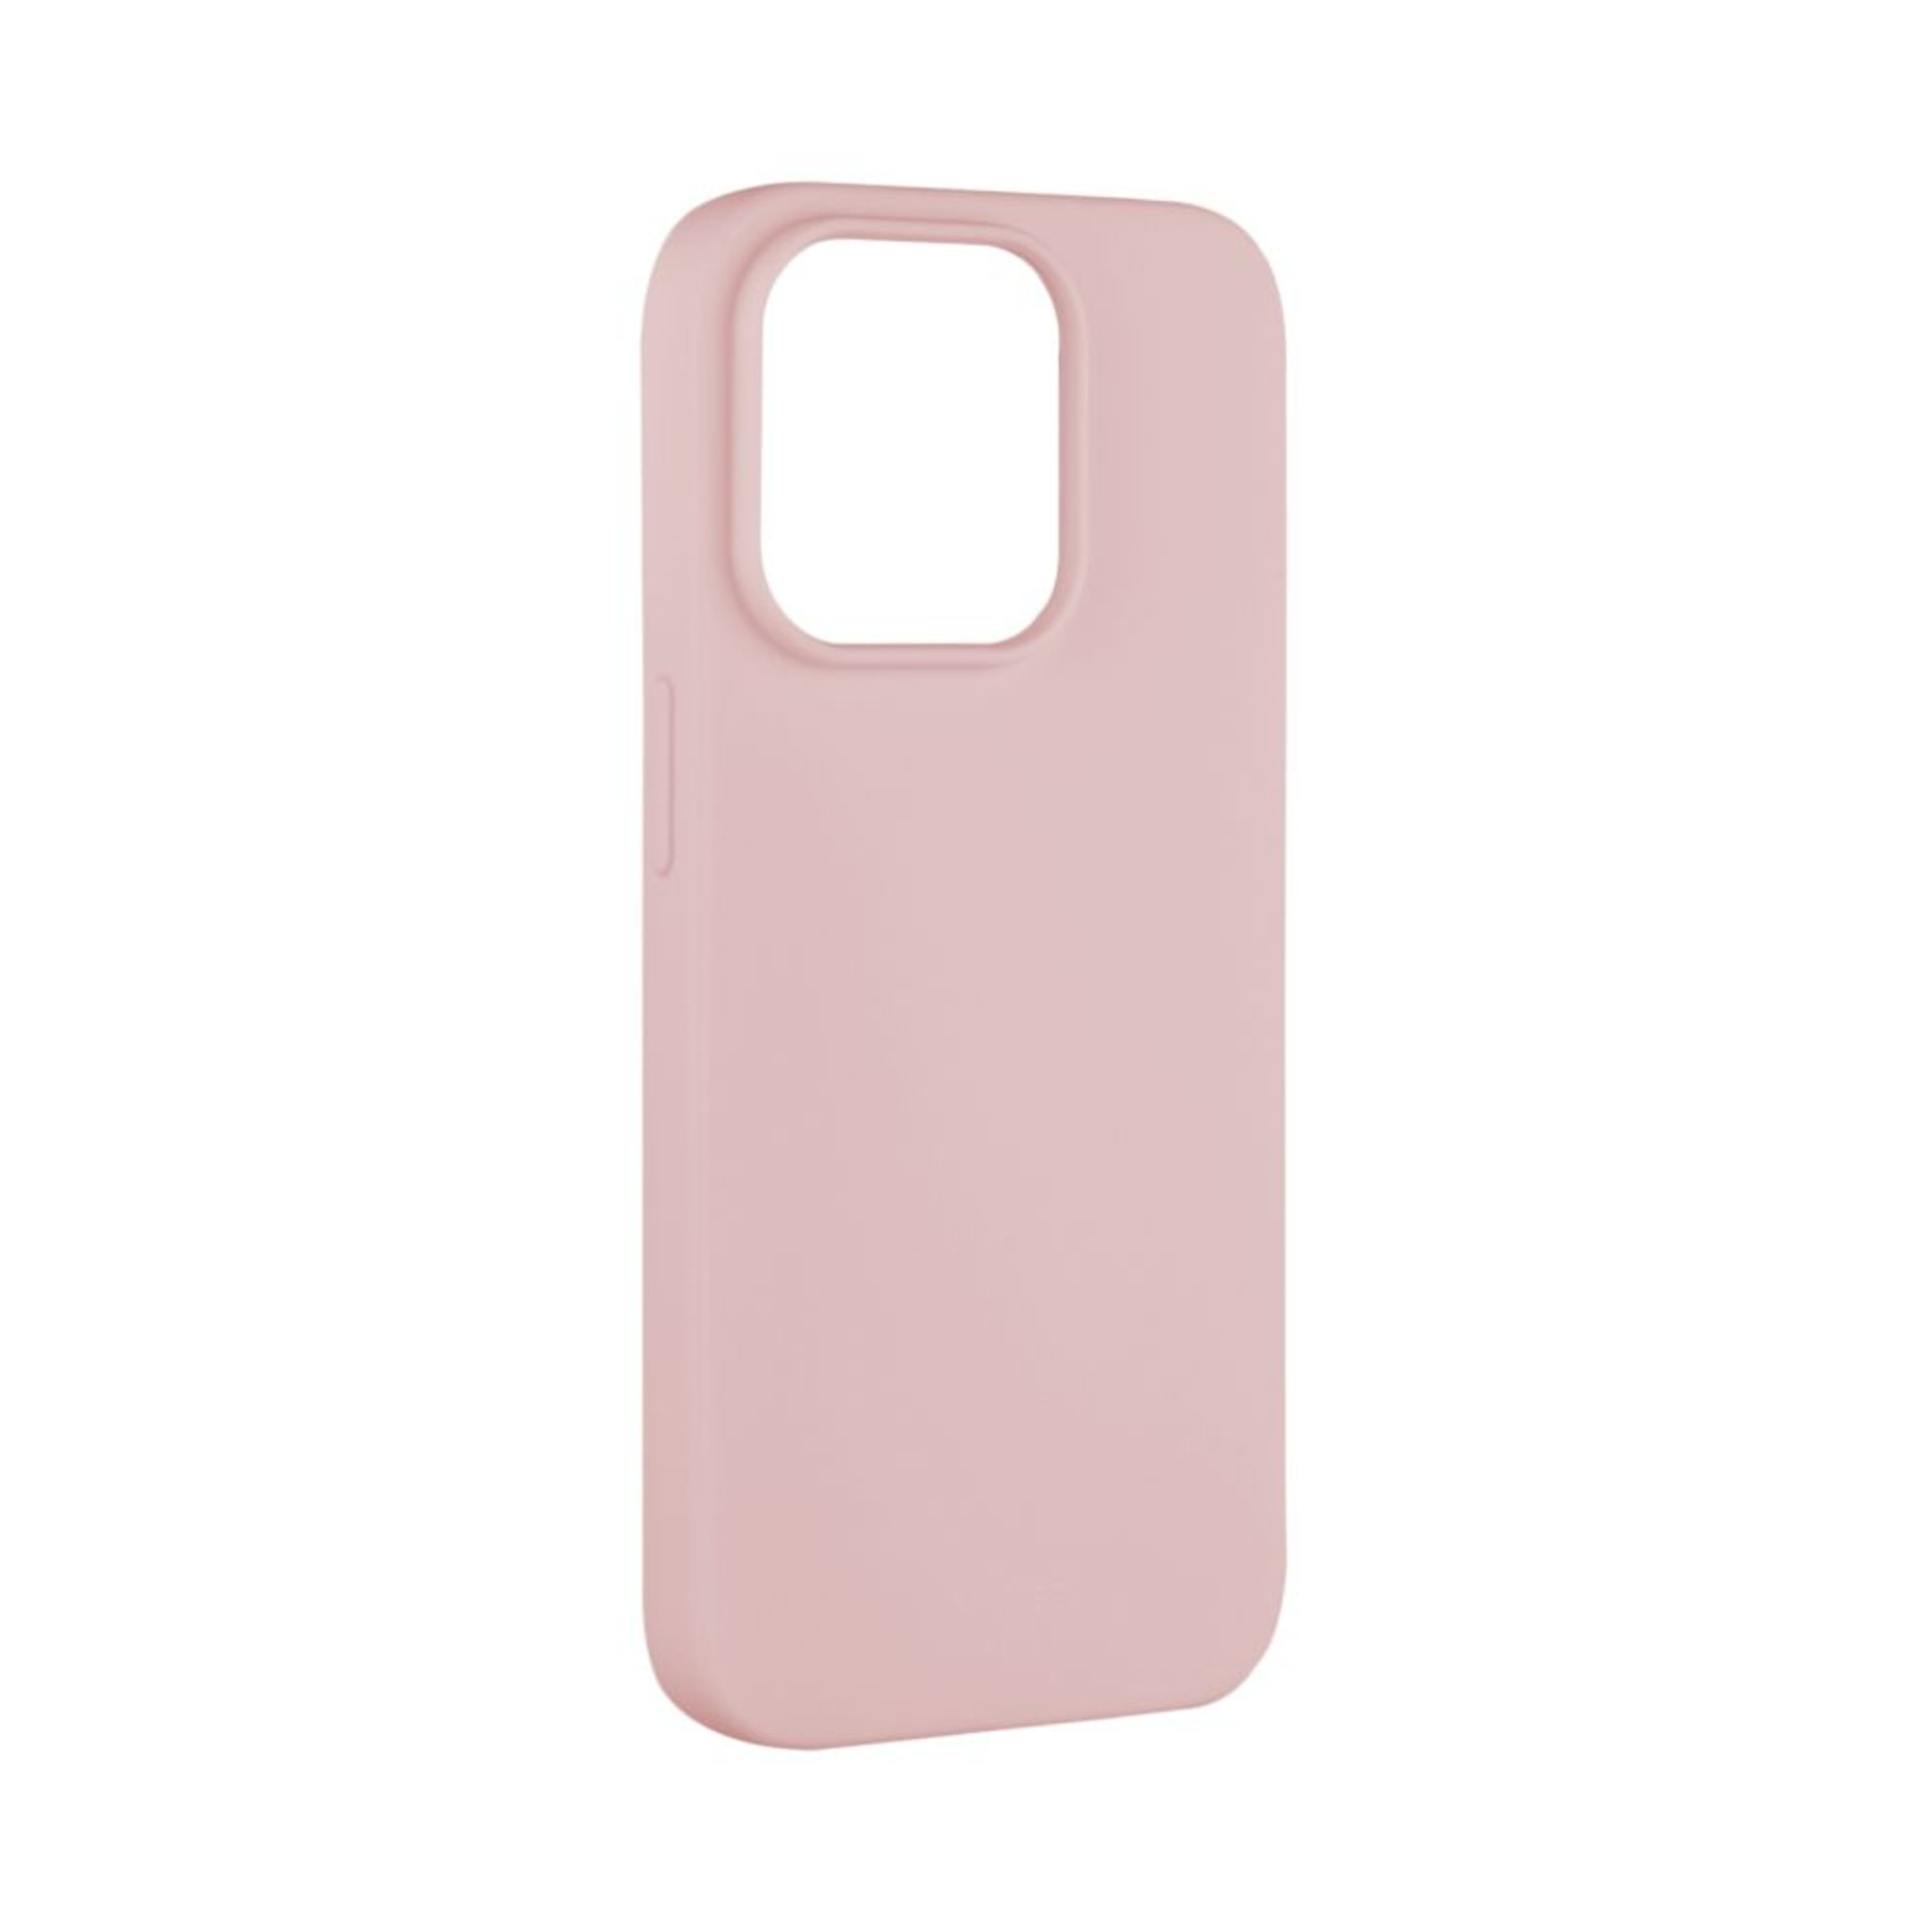 14 iPhone FIXED Backcover, Apple, FIXST-929-PK, Rosa Plus,